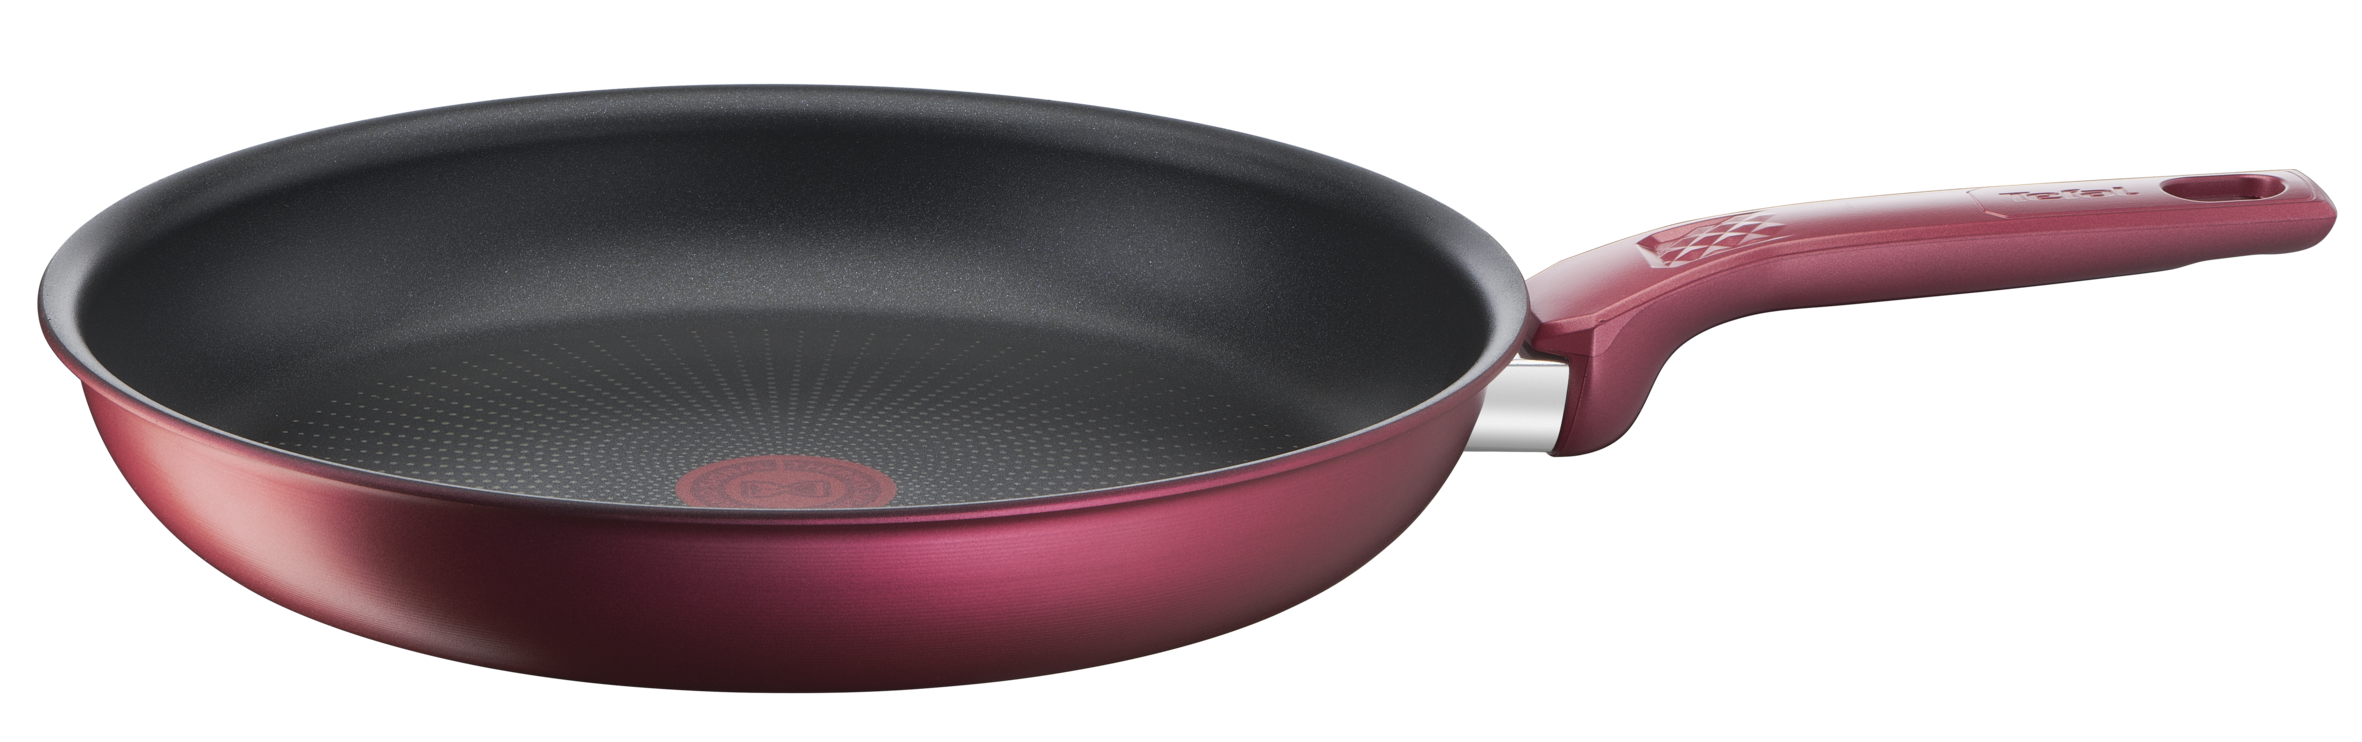 Tefal Daily Chef Red Non-Stick Induction Frypan 28cm